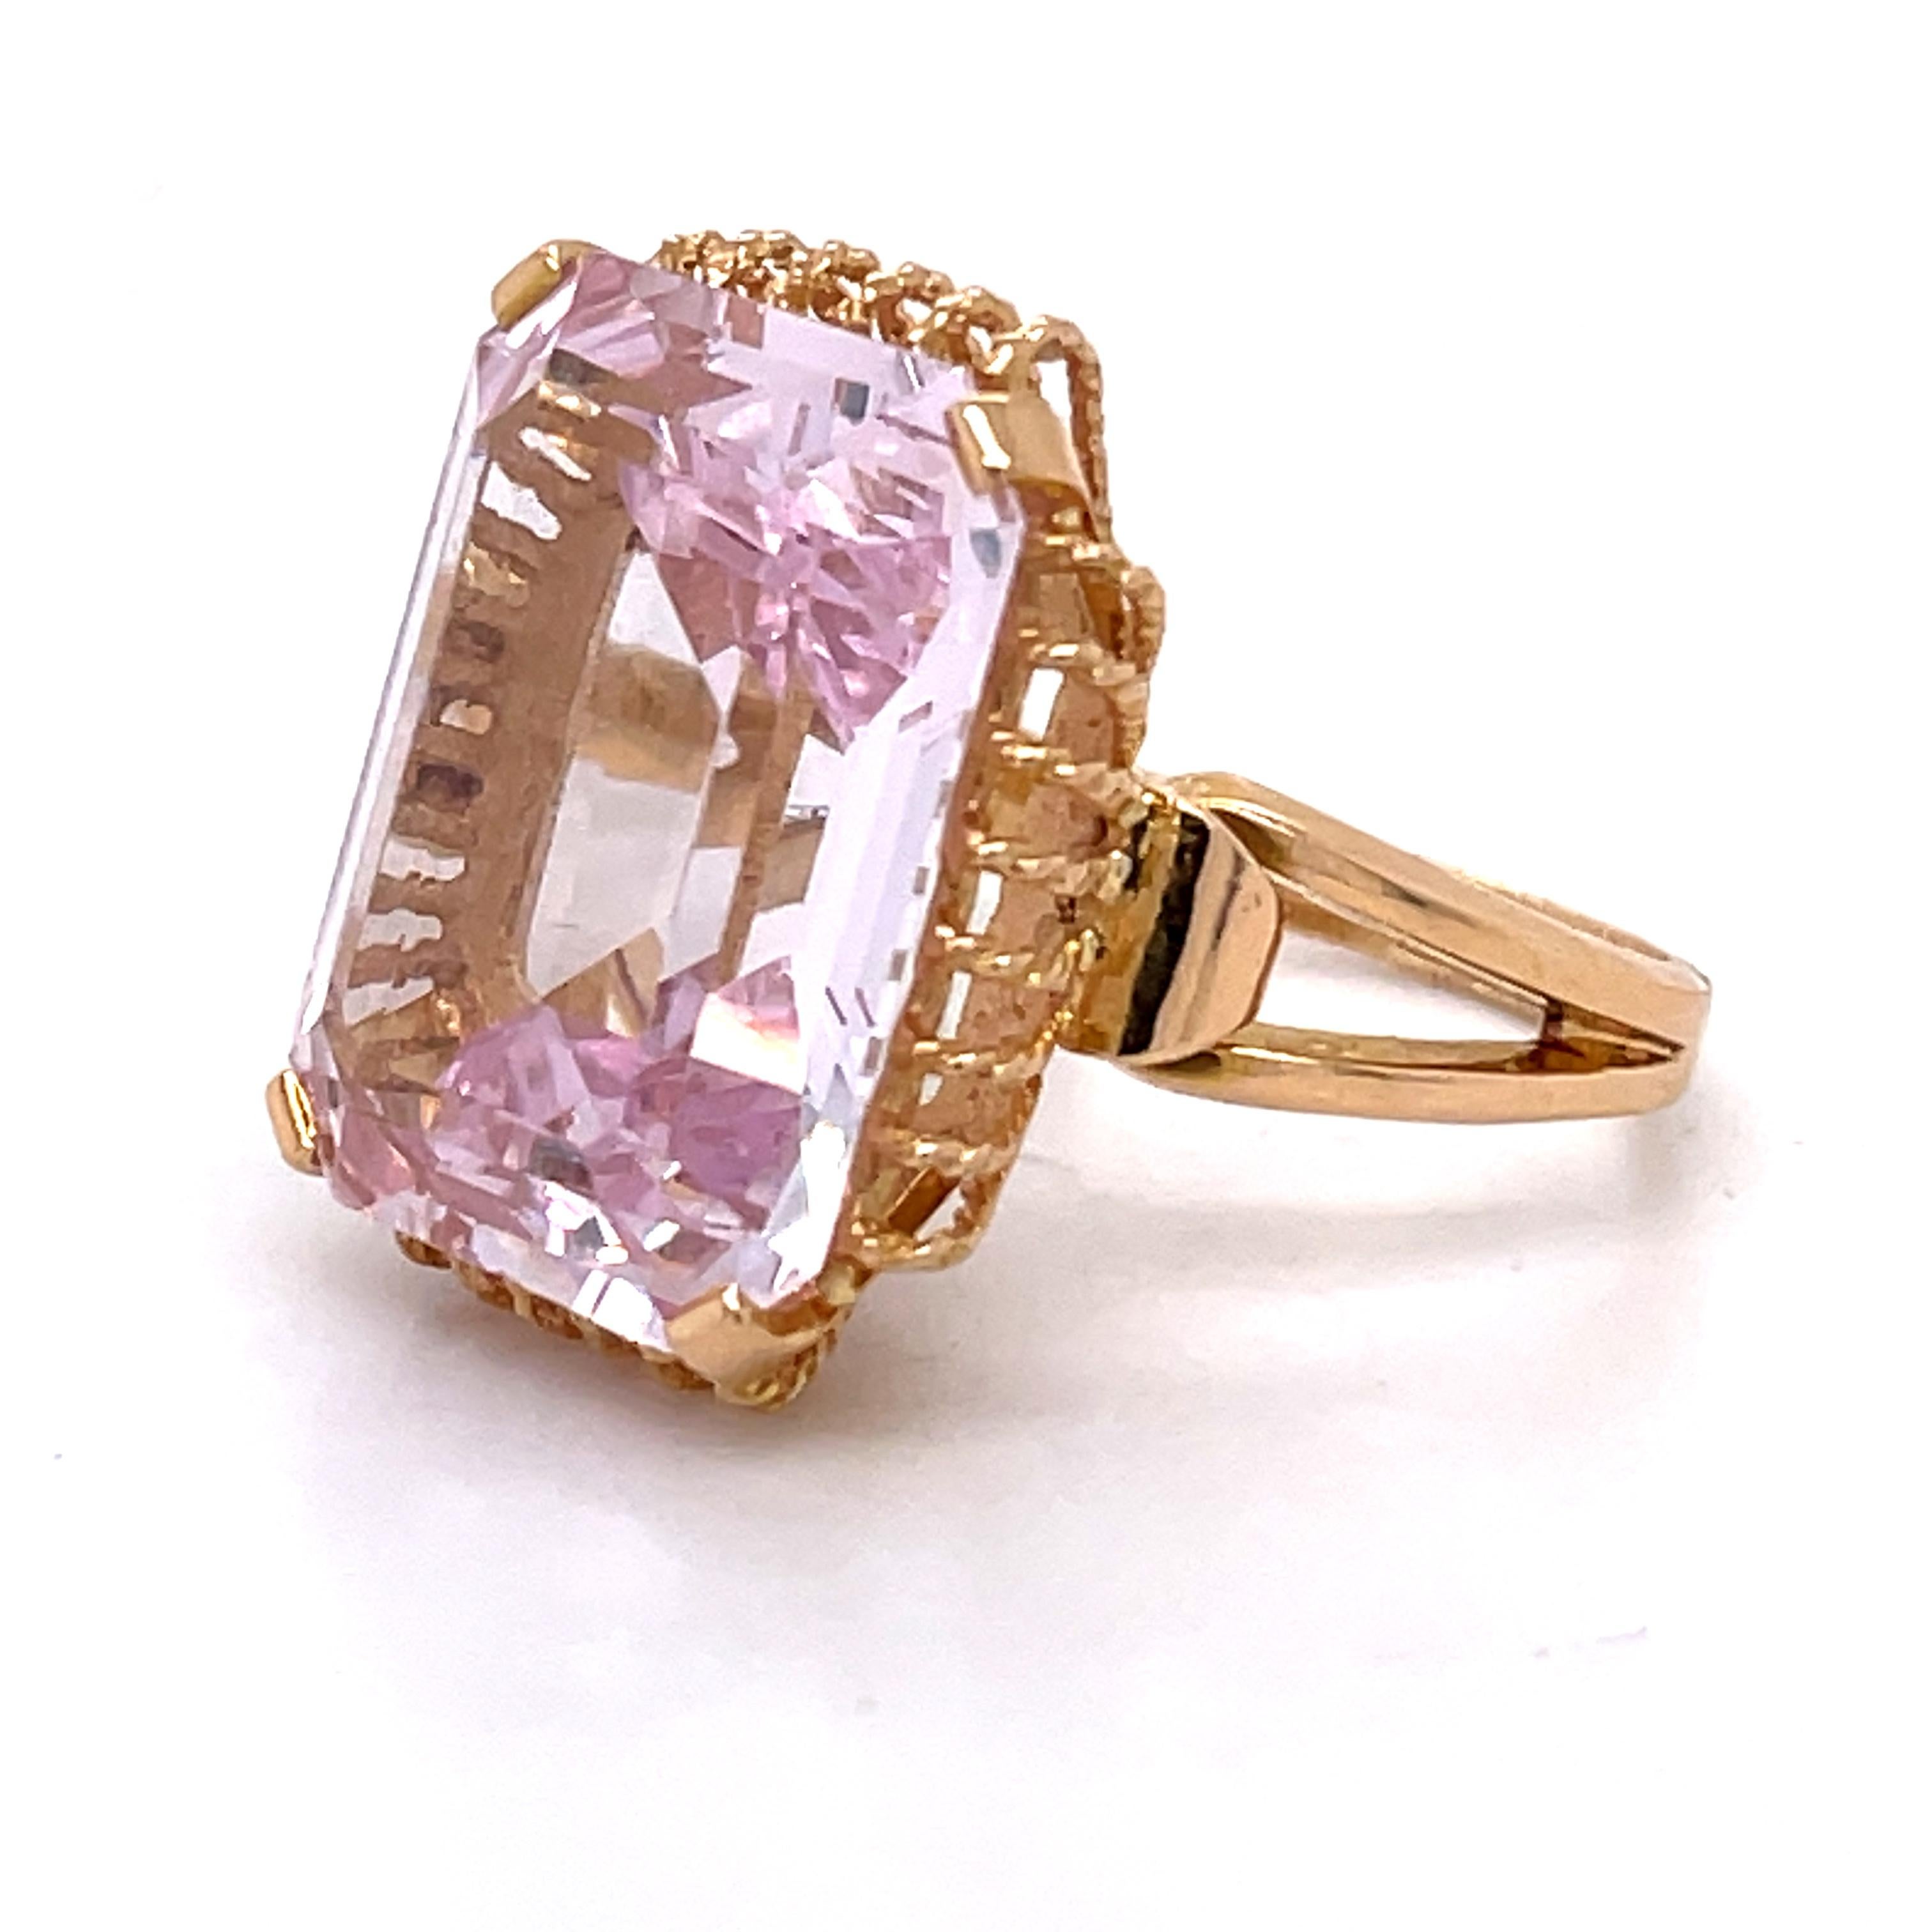 GWLAB Certified, 16.23ct Pink Spinel Emerald Cut, 14k Rose Gold, Cocktail Ring For Sale 2